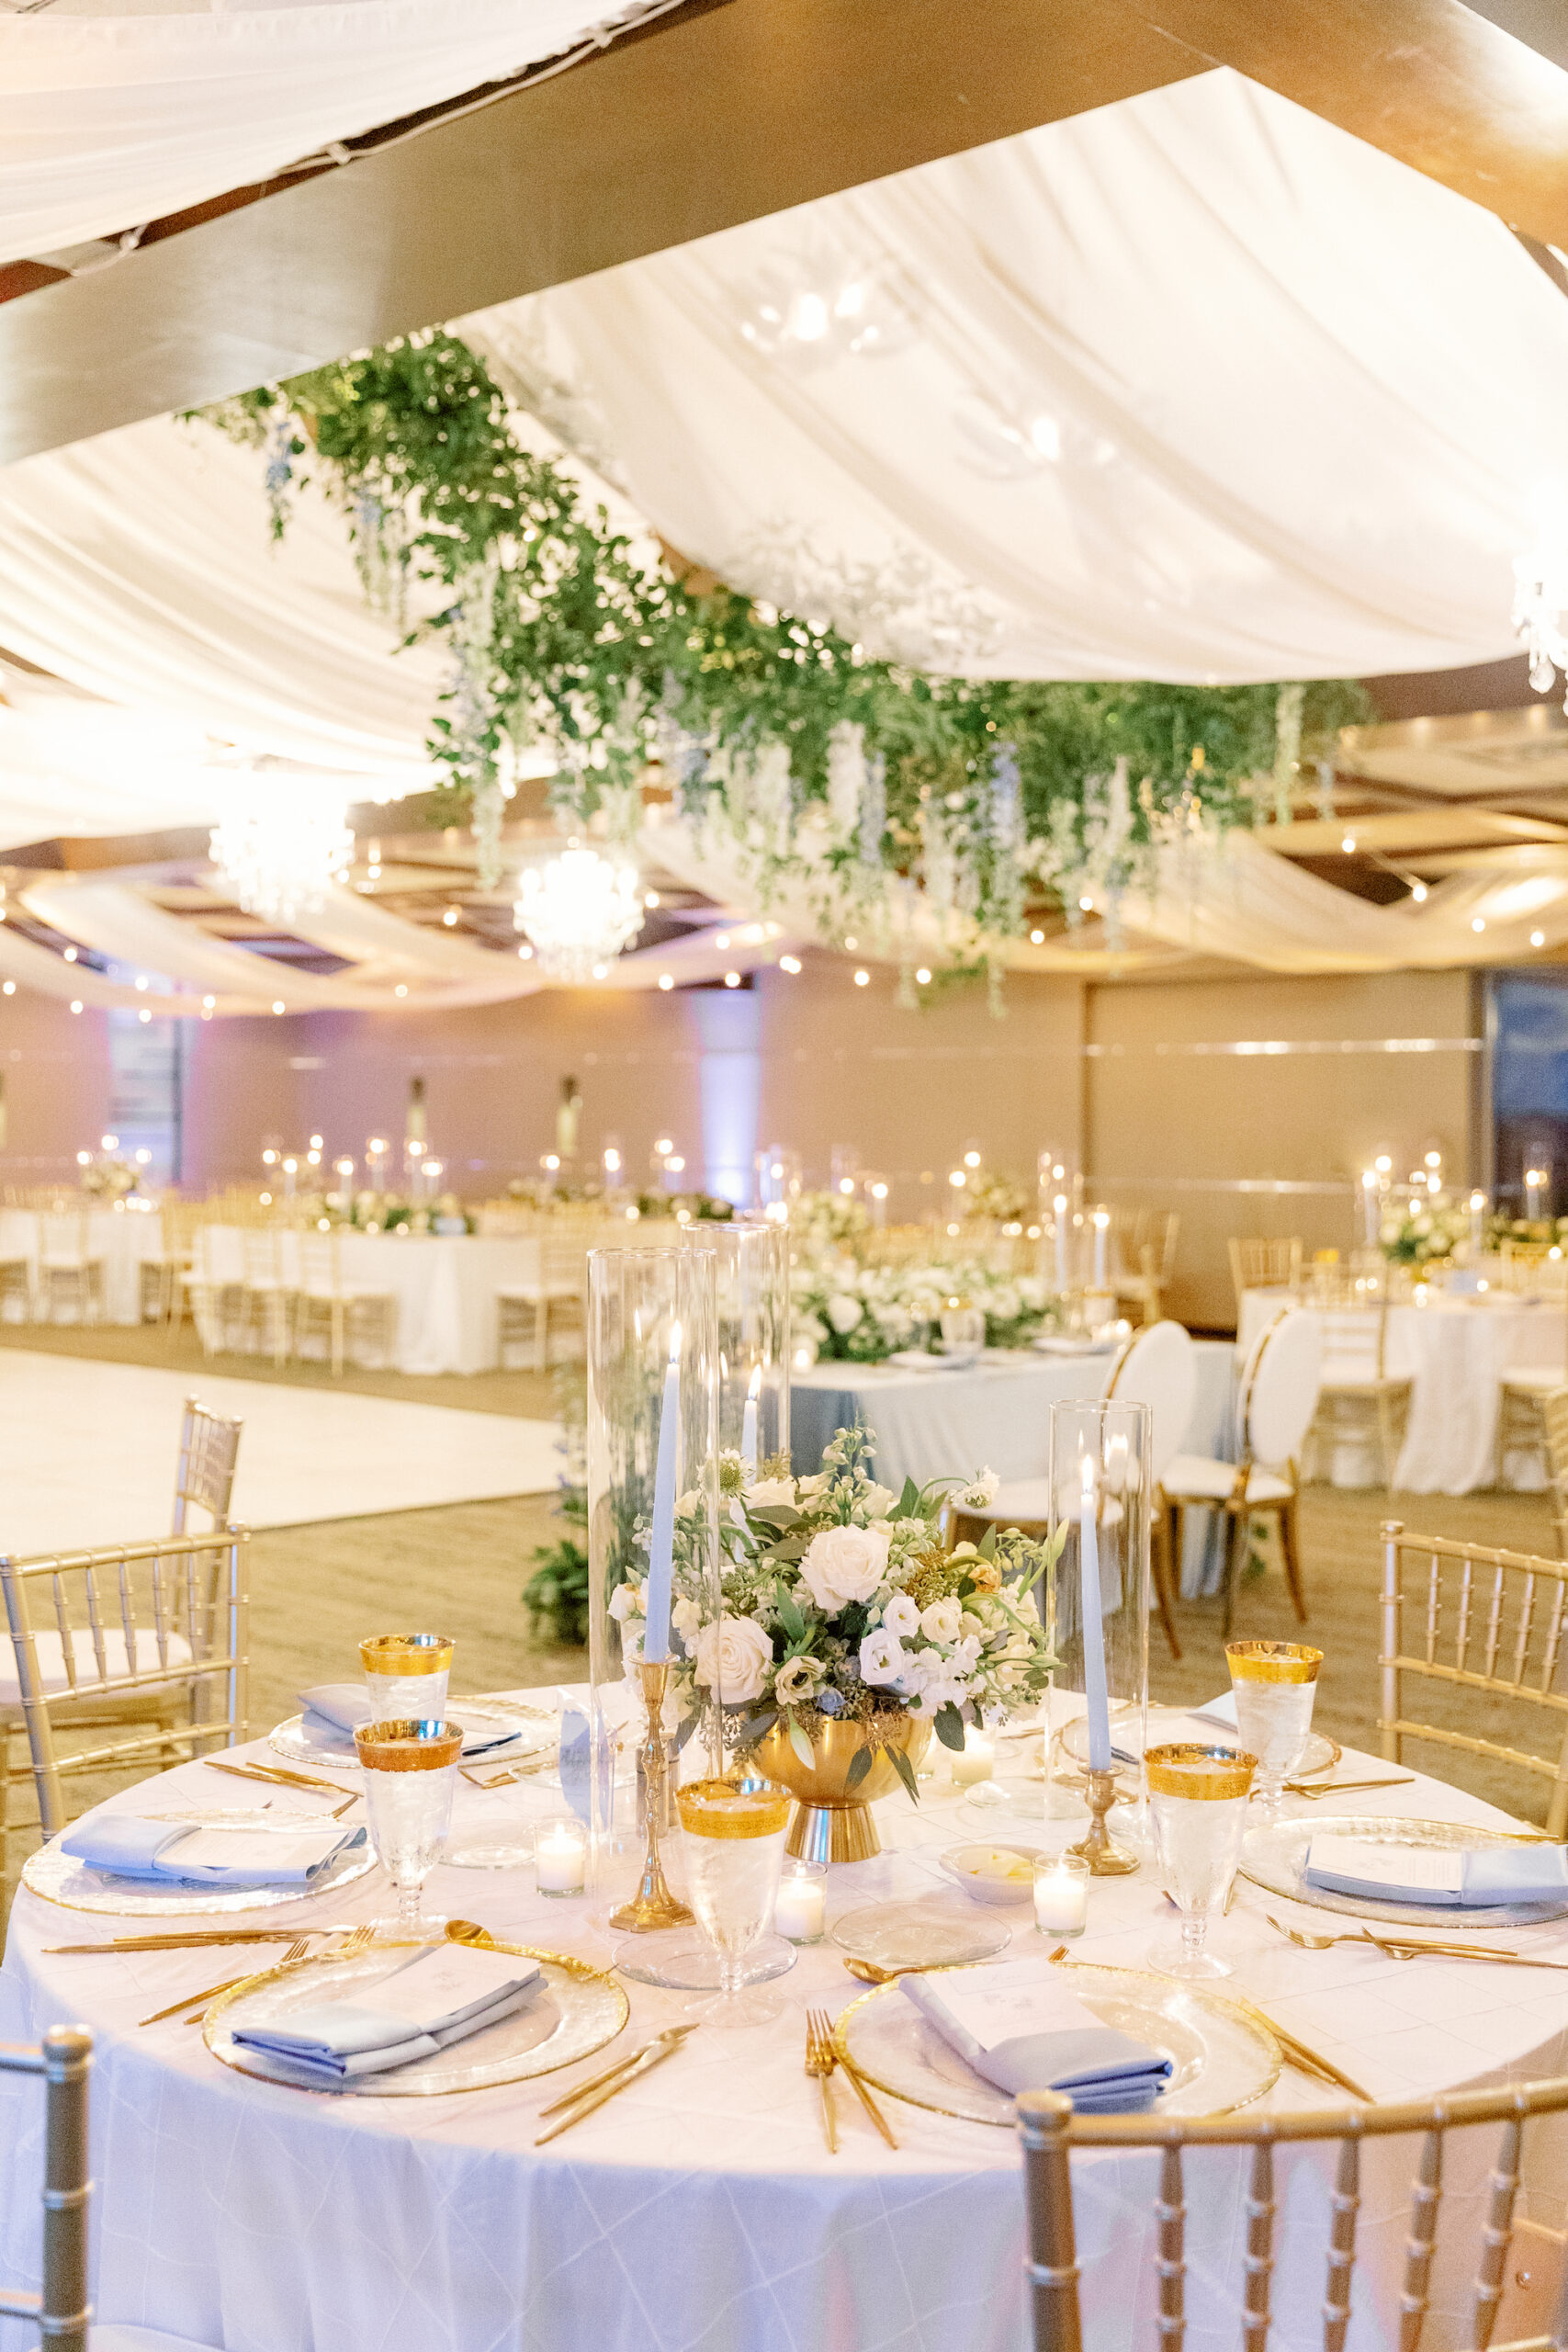 Elegant Reception Decor Ideas | Romantic Indoor White and Gold Spring Wedding Reception with Gold Chiavari Chairs and White Ceiling Drapery with Hanging Floral Arrangements | Sarasota Wedding Planner MDP Events | Florist Botanica International Design Studio | Venue Marie Selby Gardens